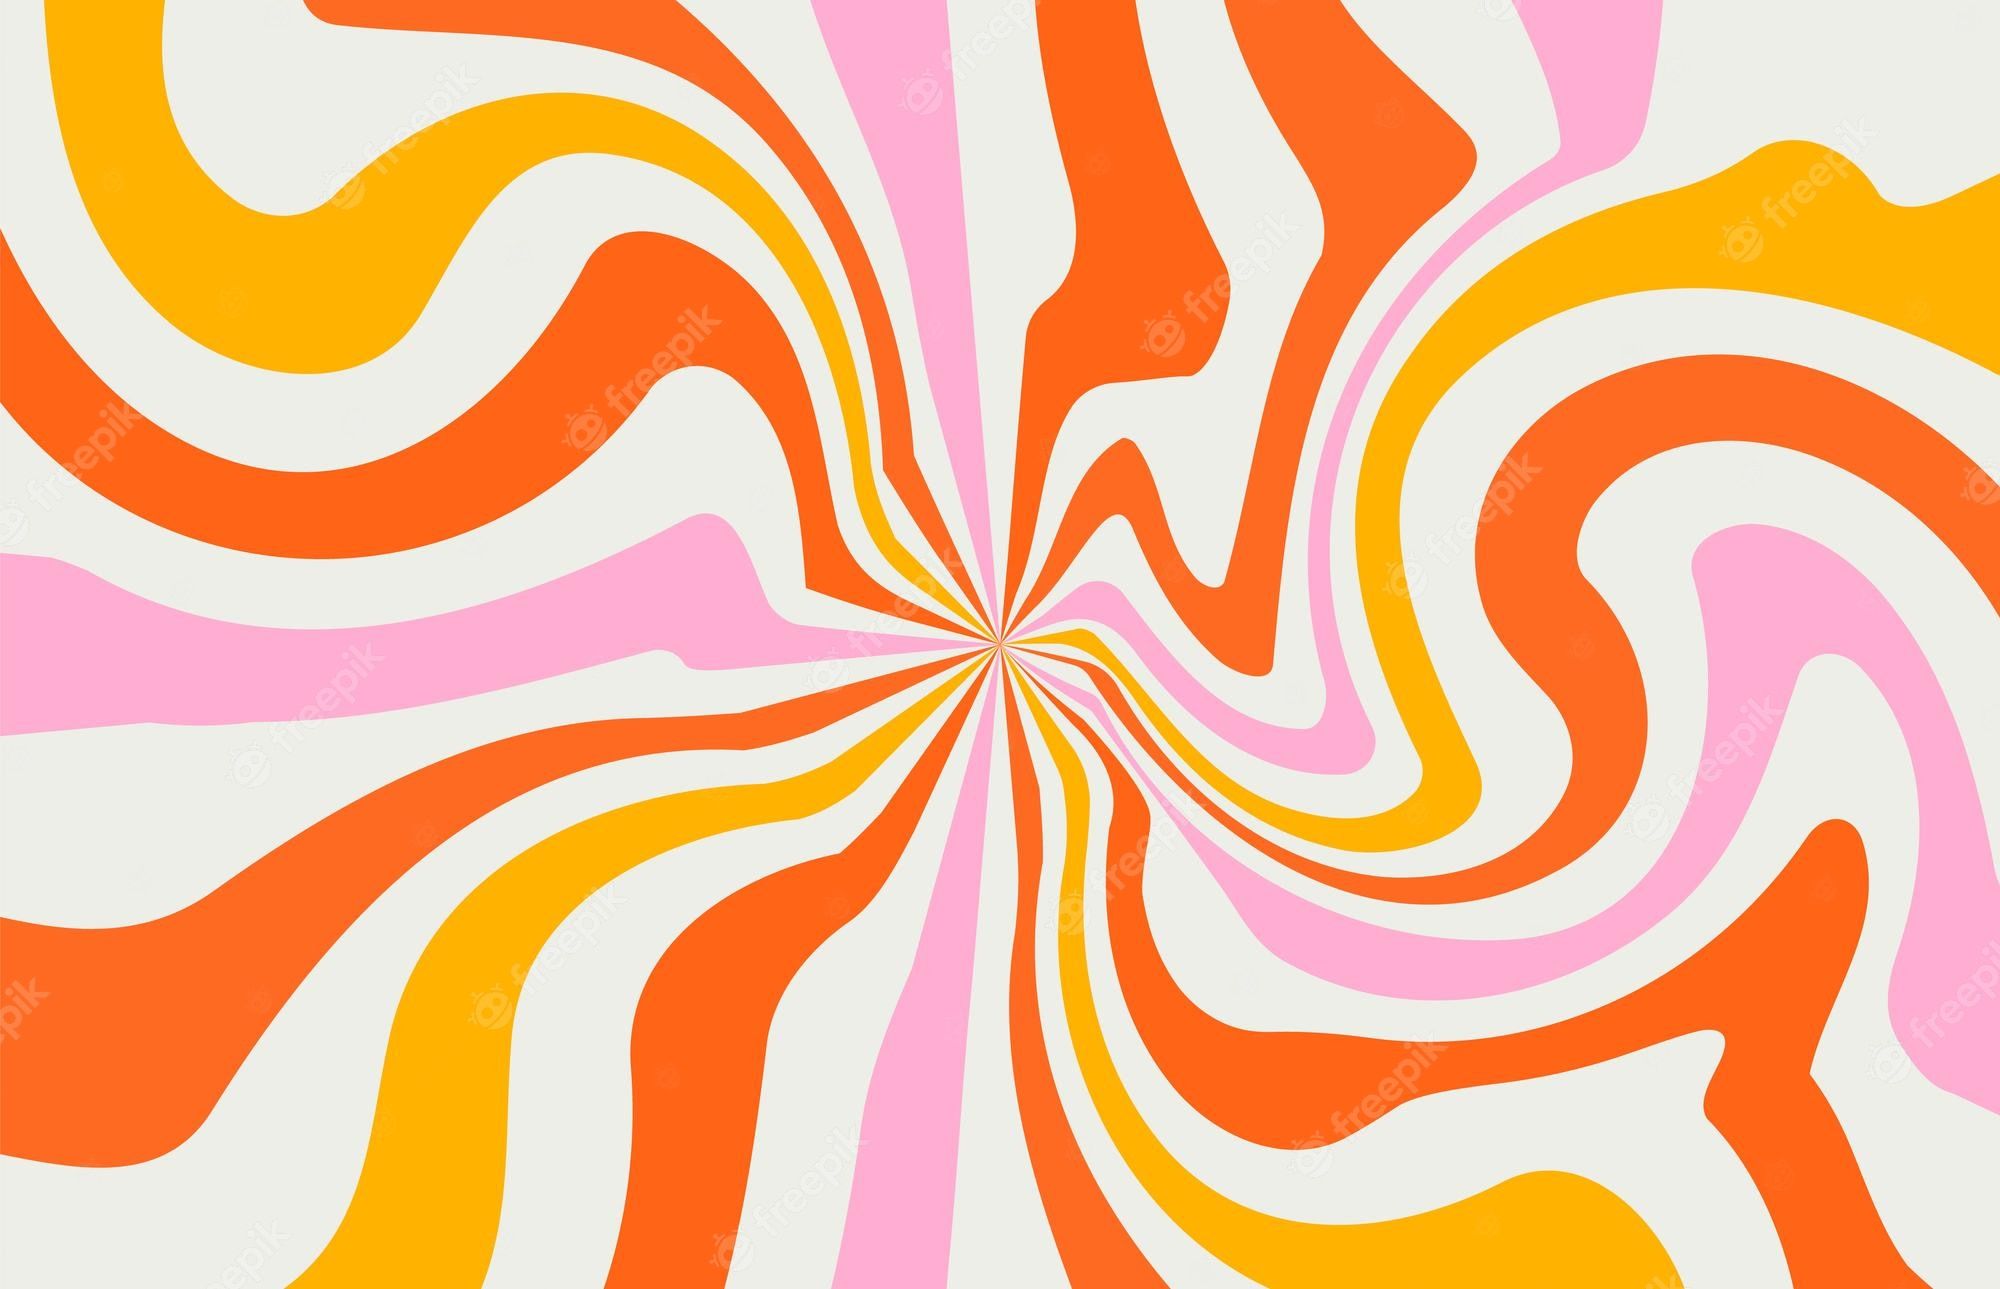 An abstract background with a swirling psychedelic pattern in bright orange, pink and white. - 60s